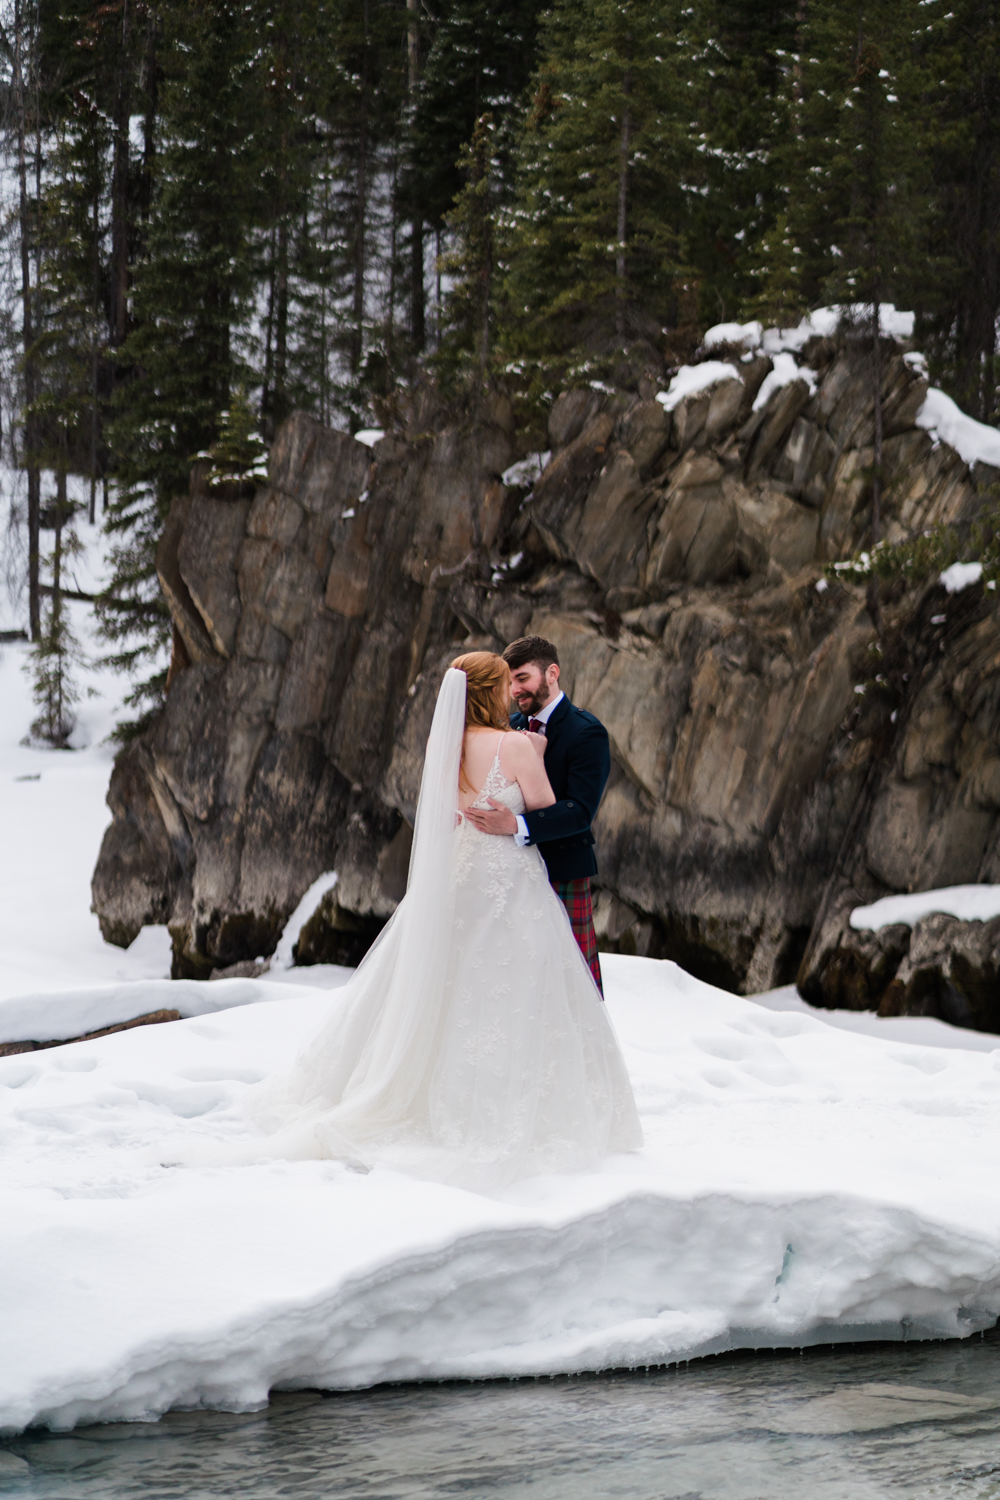 close up of bride and groom embracing while standing on snowy ground with a rockface in the background